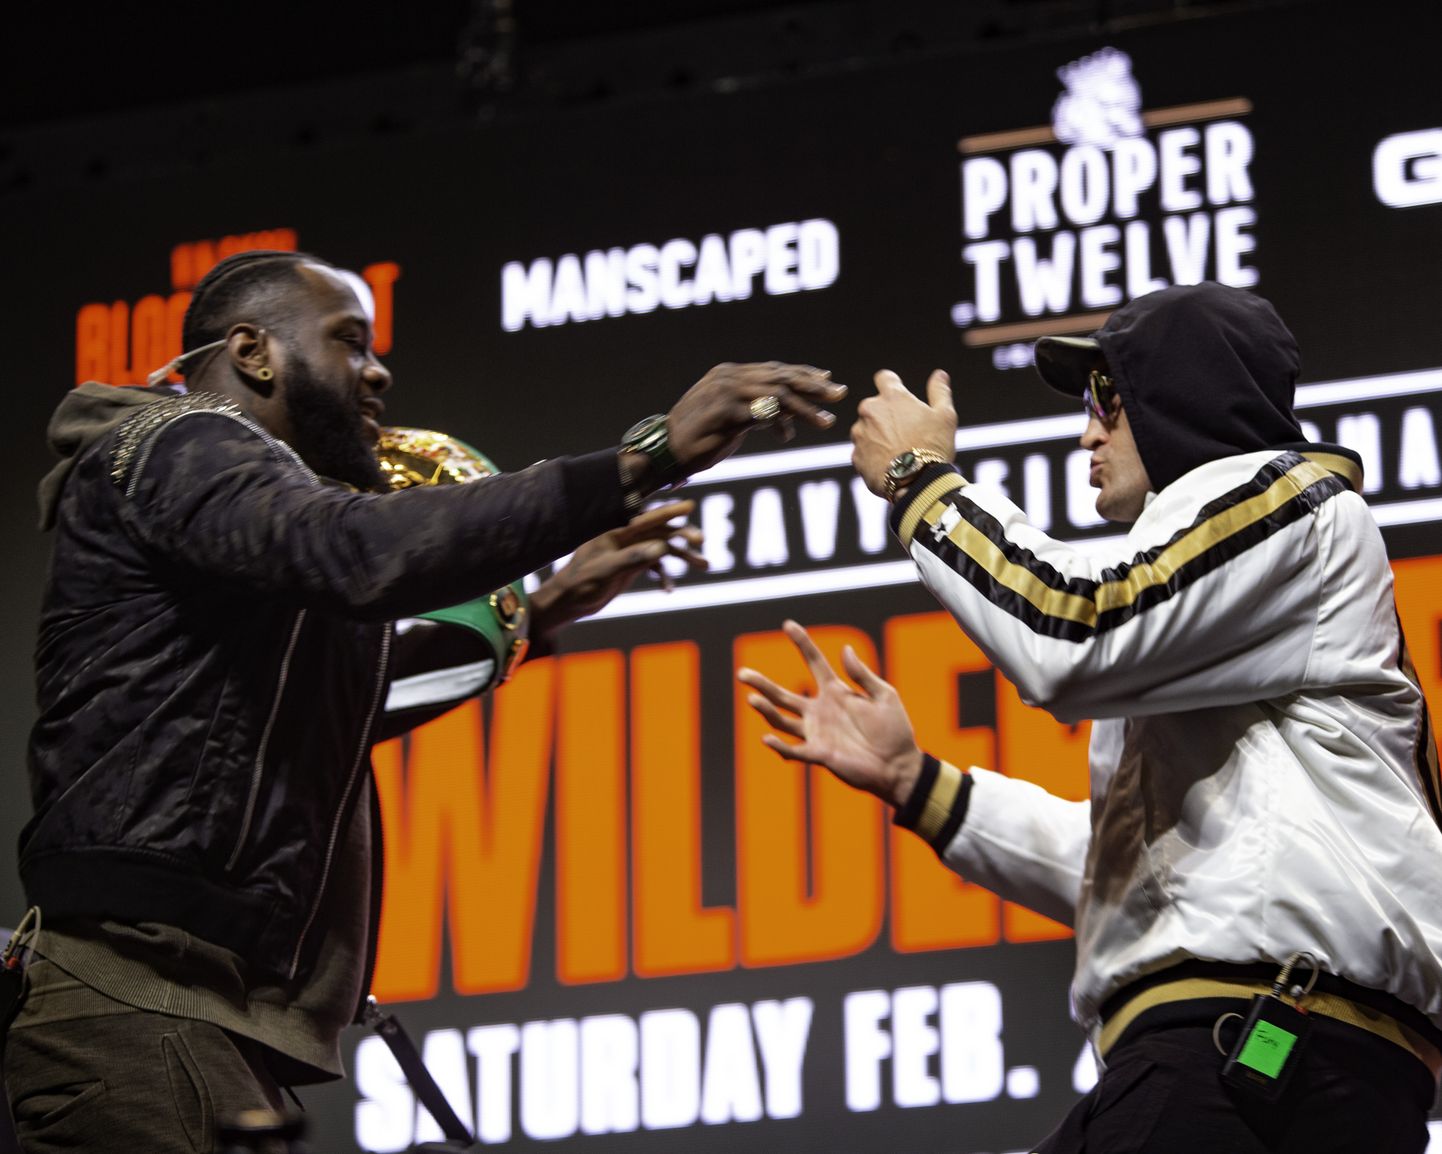 February 19, 2020, Las Vegas, Nevada, USA: Heavyweight boxers Deontay Wilder and Tyson Fury trade insults and shoves during a press conference at the MGM Grand promoting their upcoming bout. (Credit Image: © Larry Burton/ZUMA Wire)